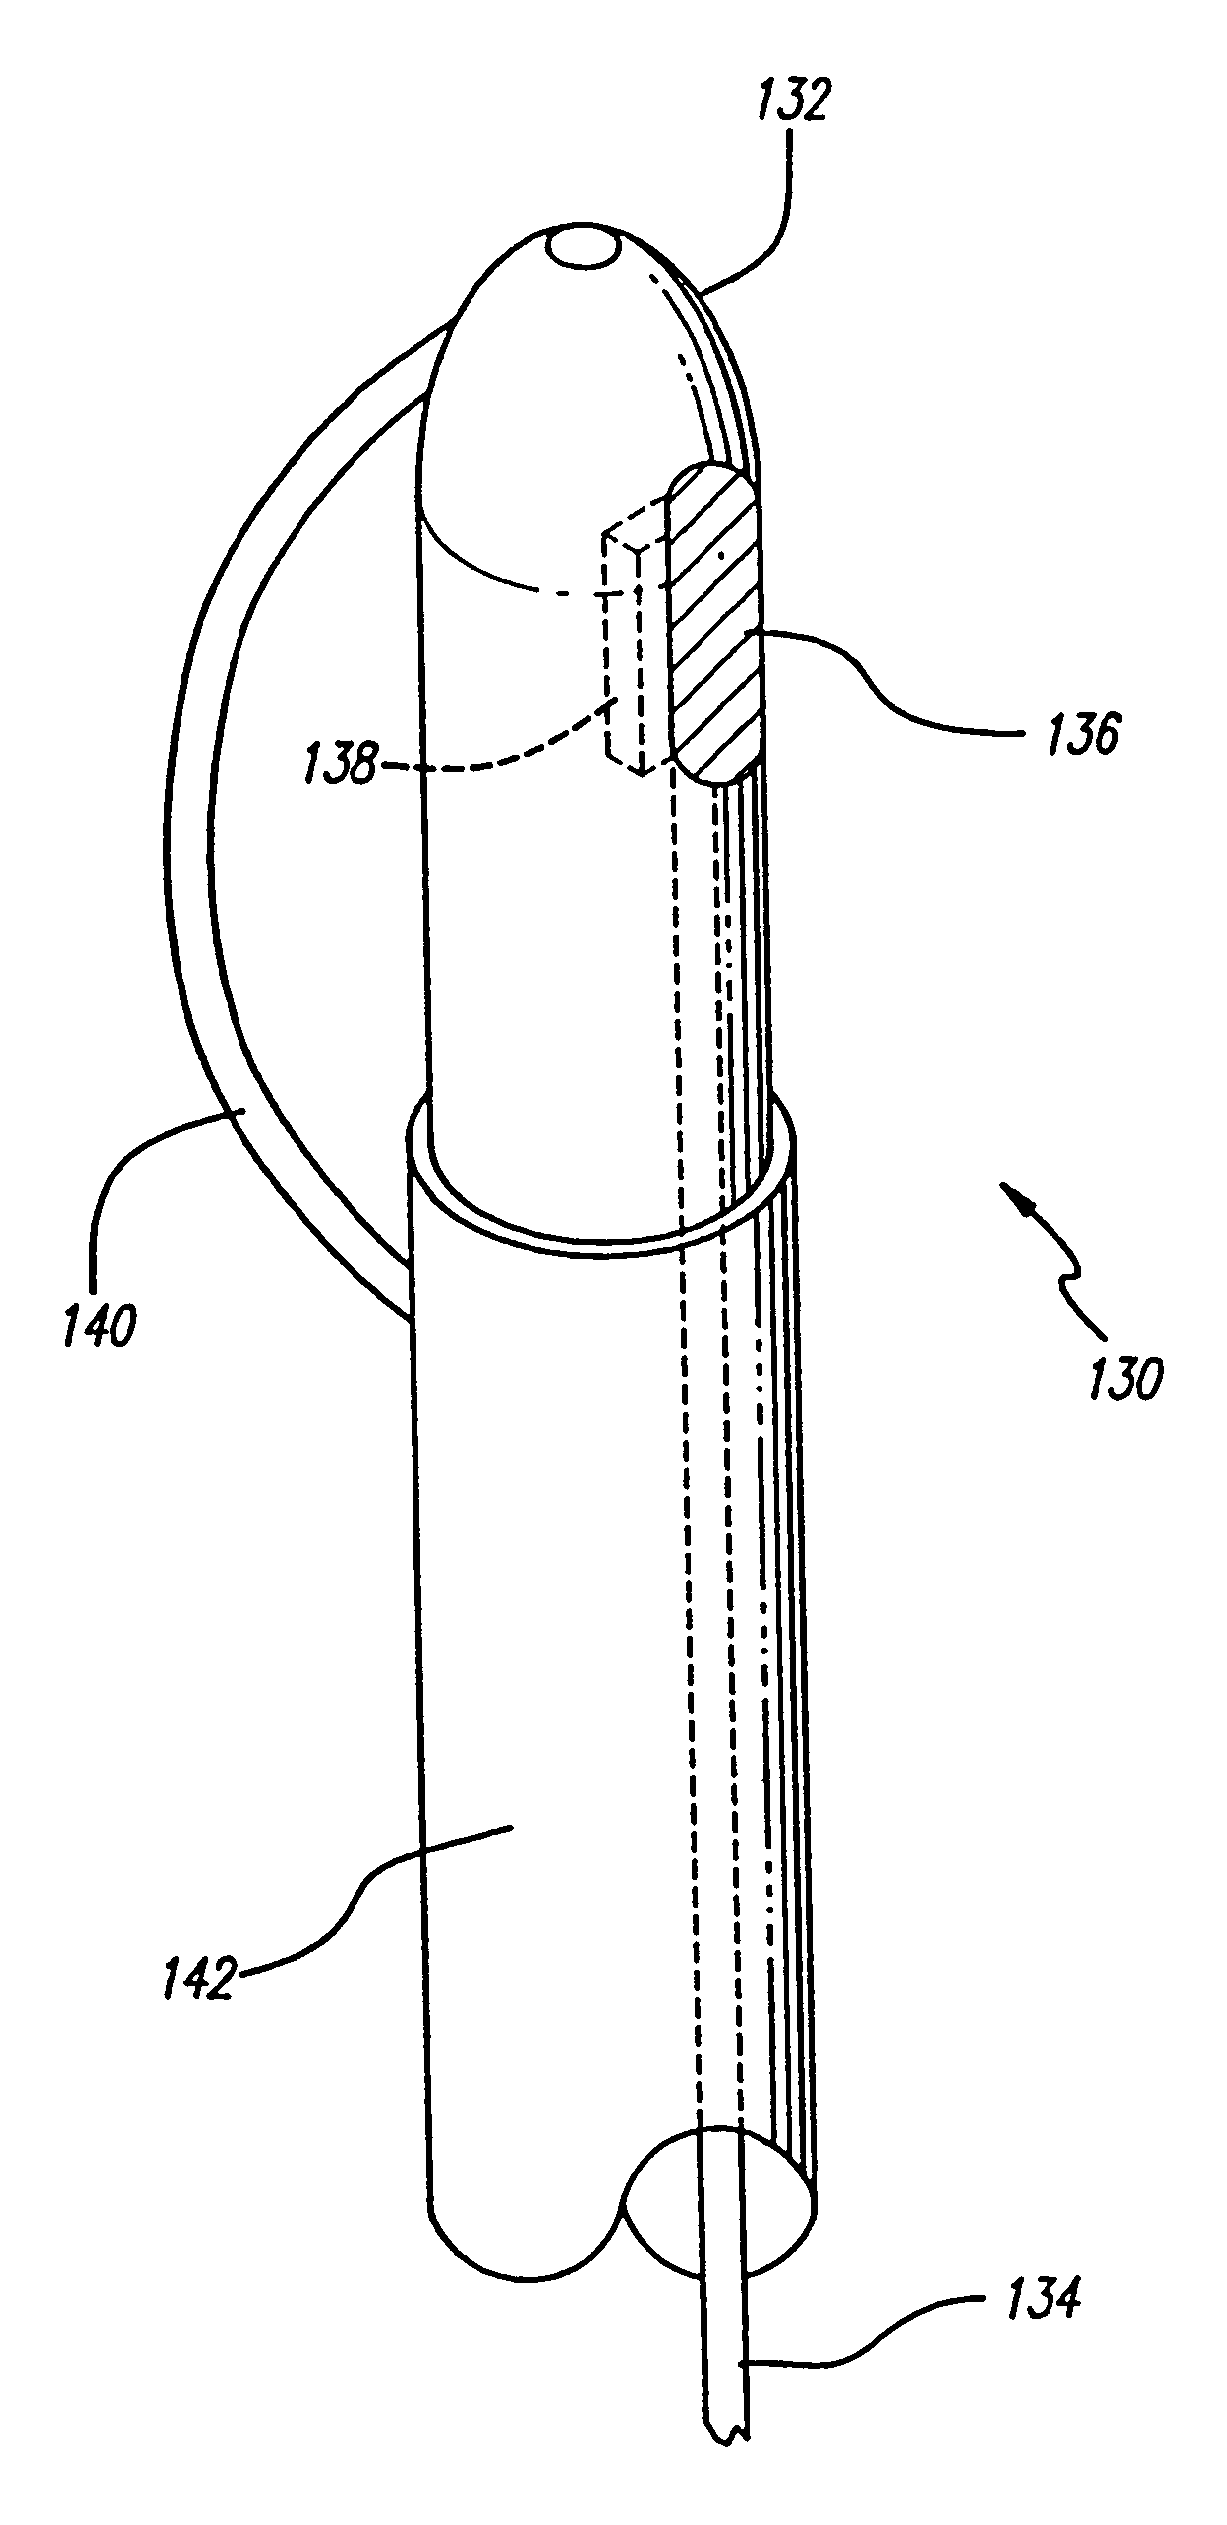 Method and apparatus for treating venous insufficiency using directionally applied energy